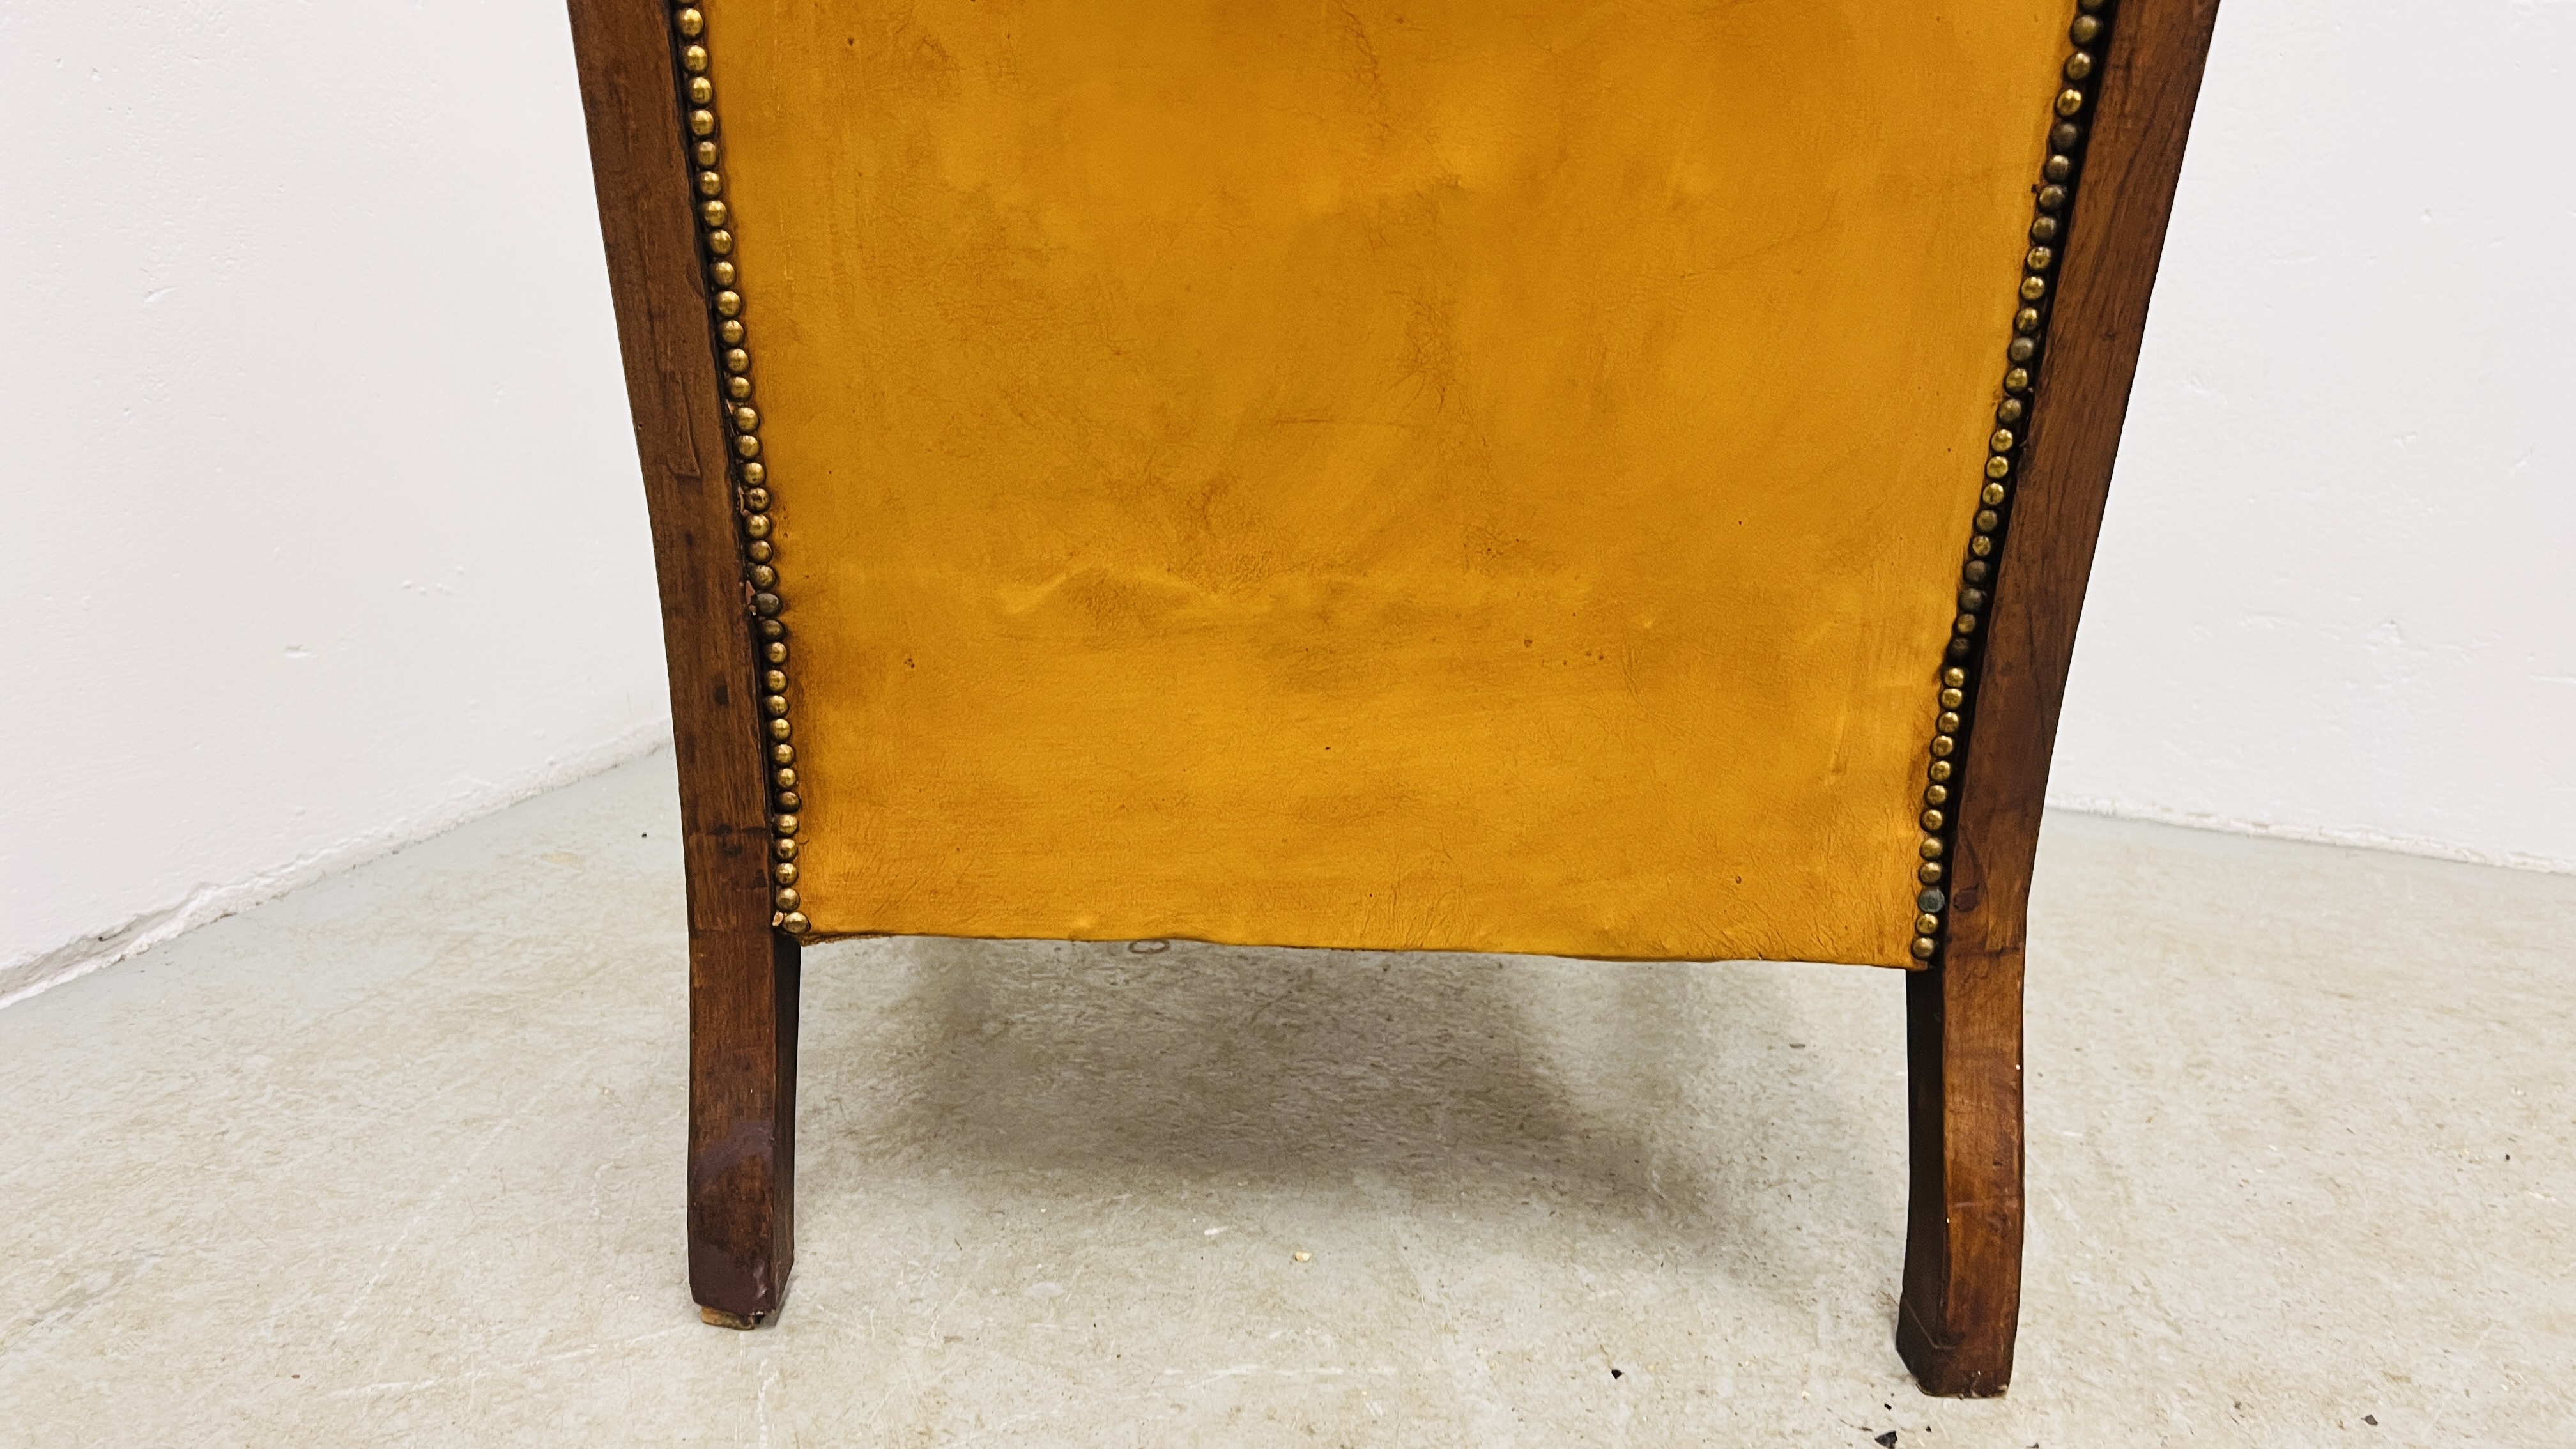 ANTIQUE EDWARDIAN MAHOGANY LOW CHAIR UPHOLSTERED IN TAN LEATHER - BUTTON BACK. - Image 10 of 12